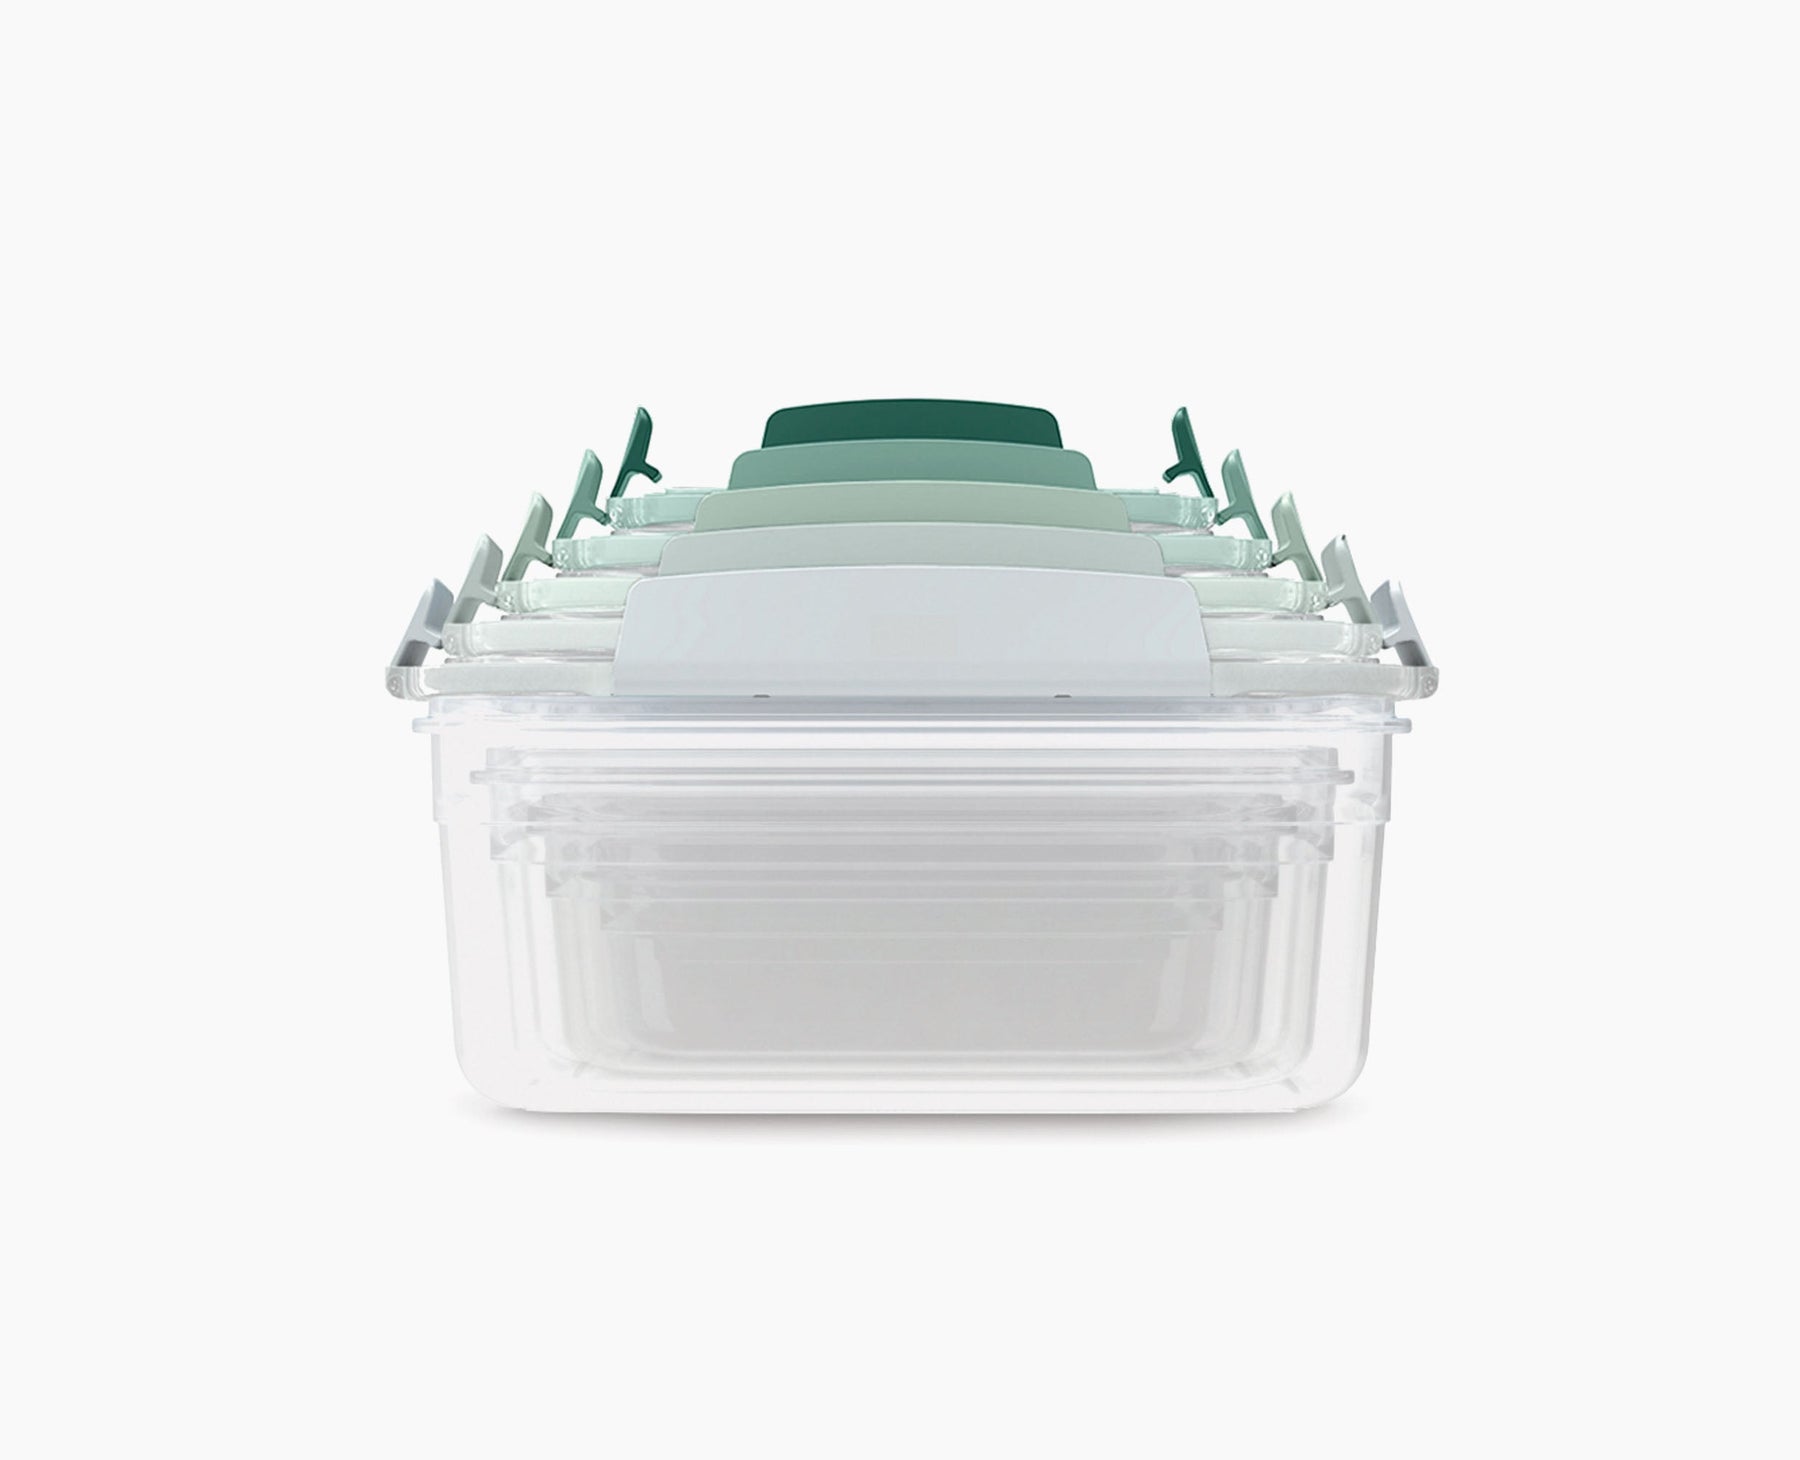 Member's Mark Plastic Bowls with Lids - 4 Pc.